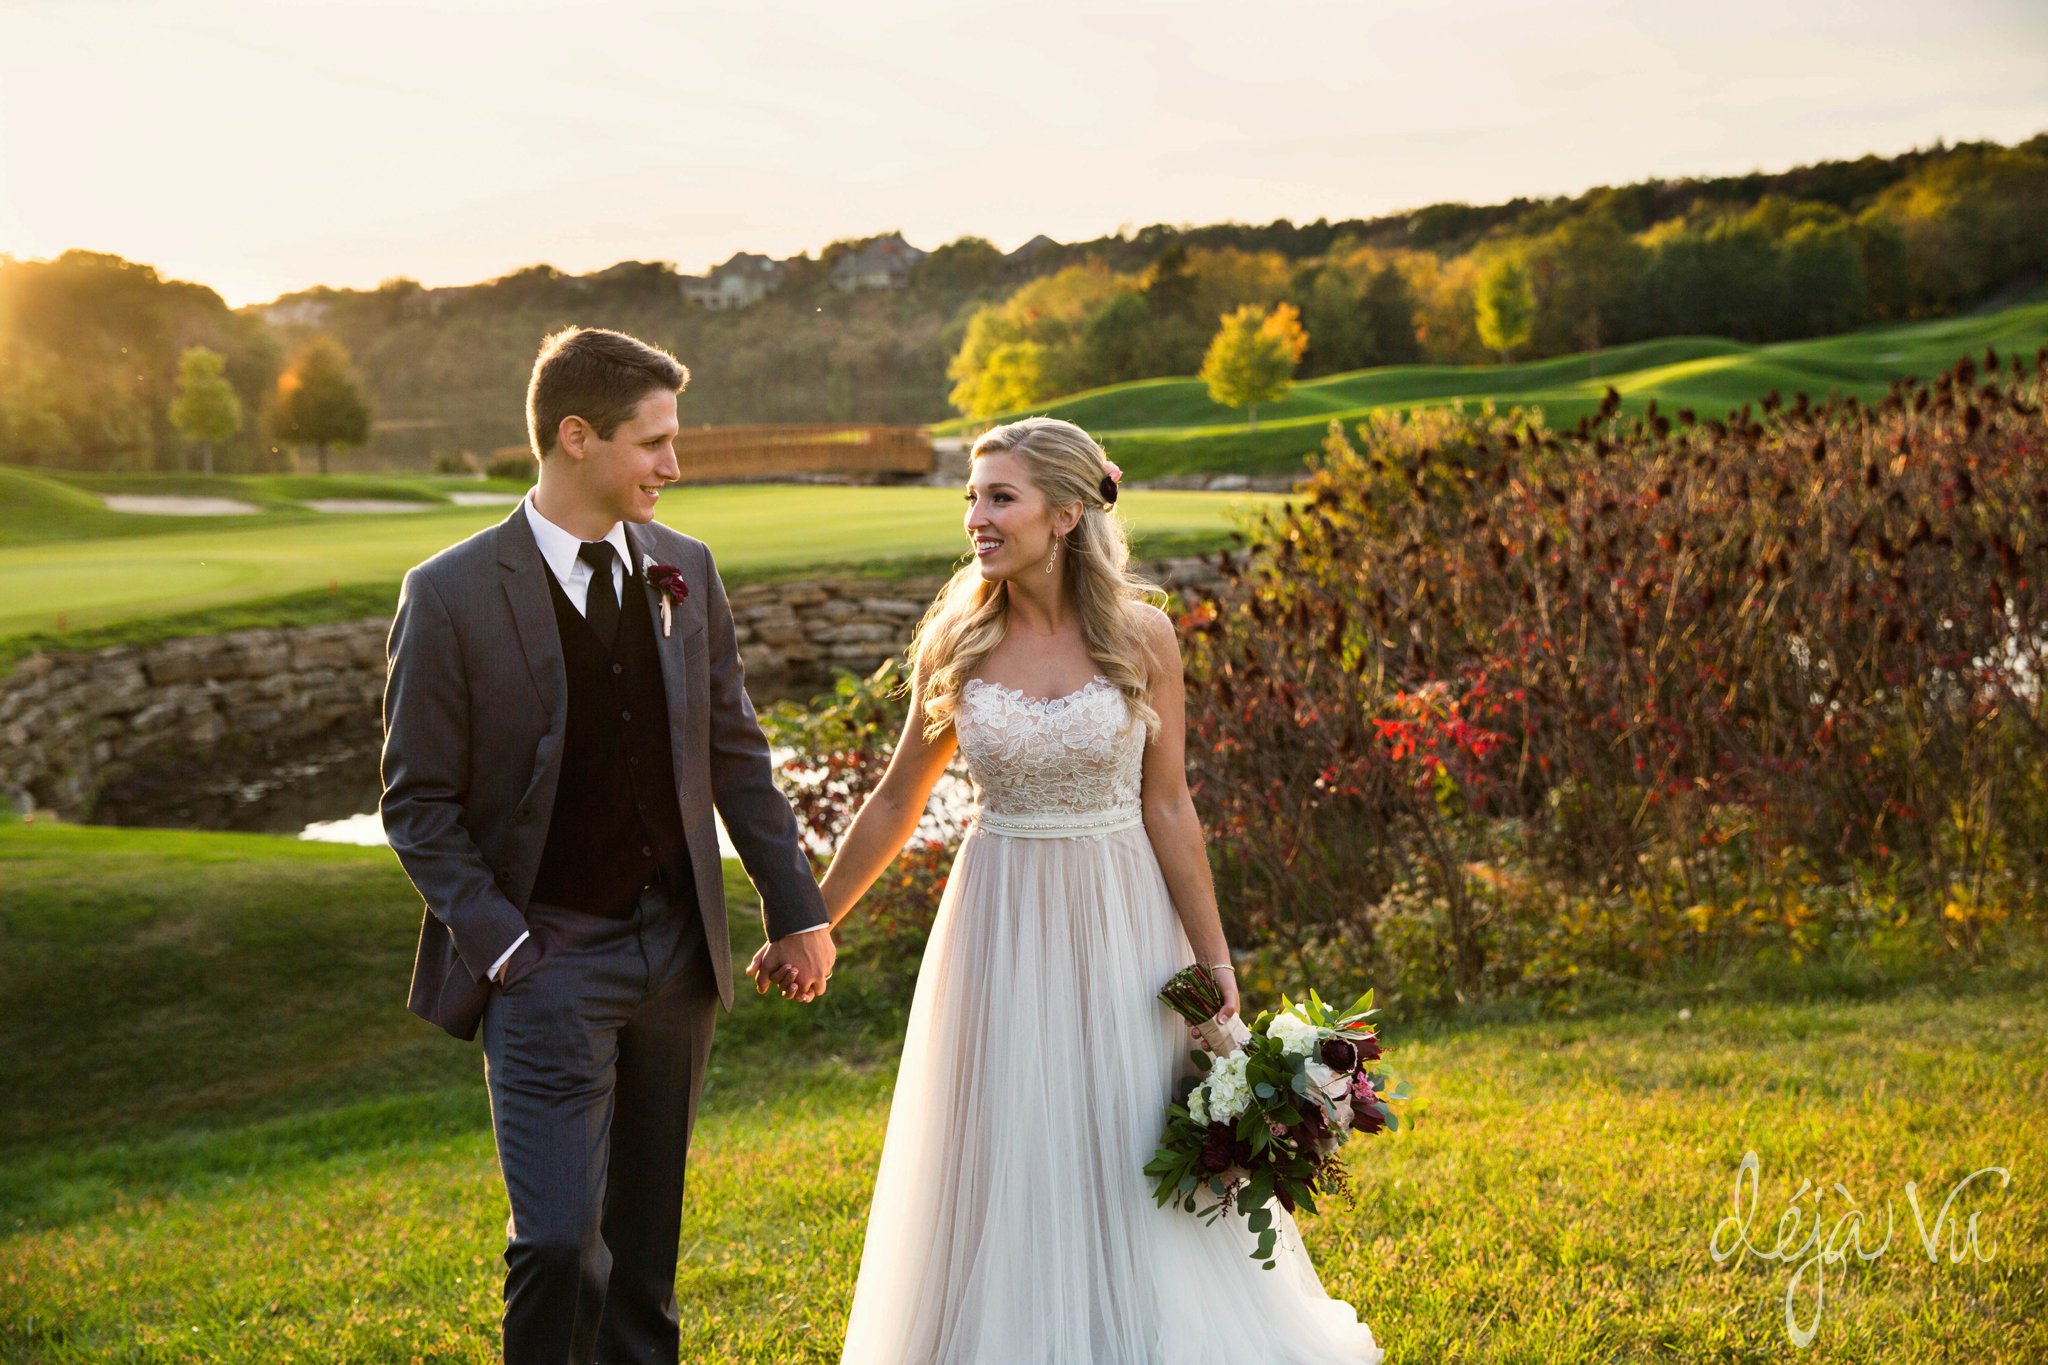 Shadow Glen Country Club Wedding | Bride and groom holding hands | Images by: www.feliciathephotographer.com